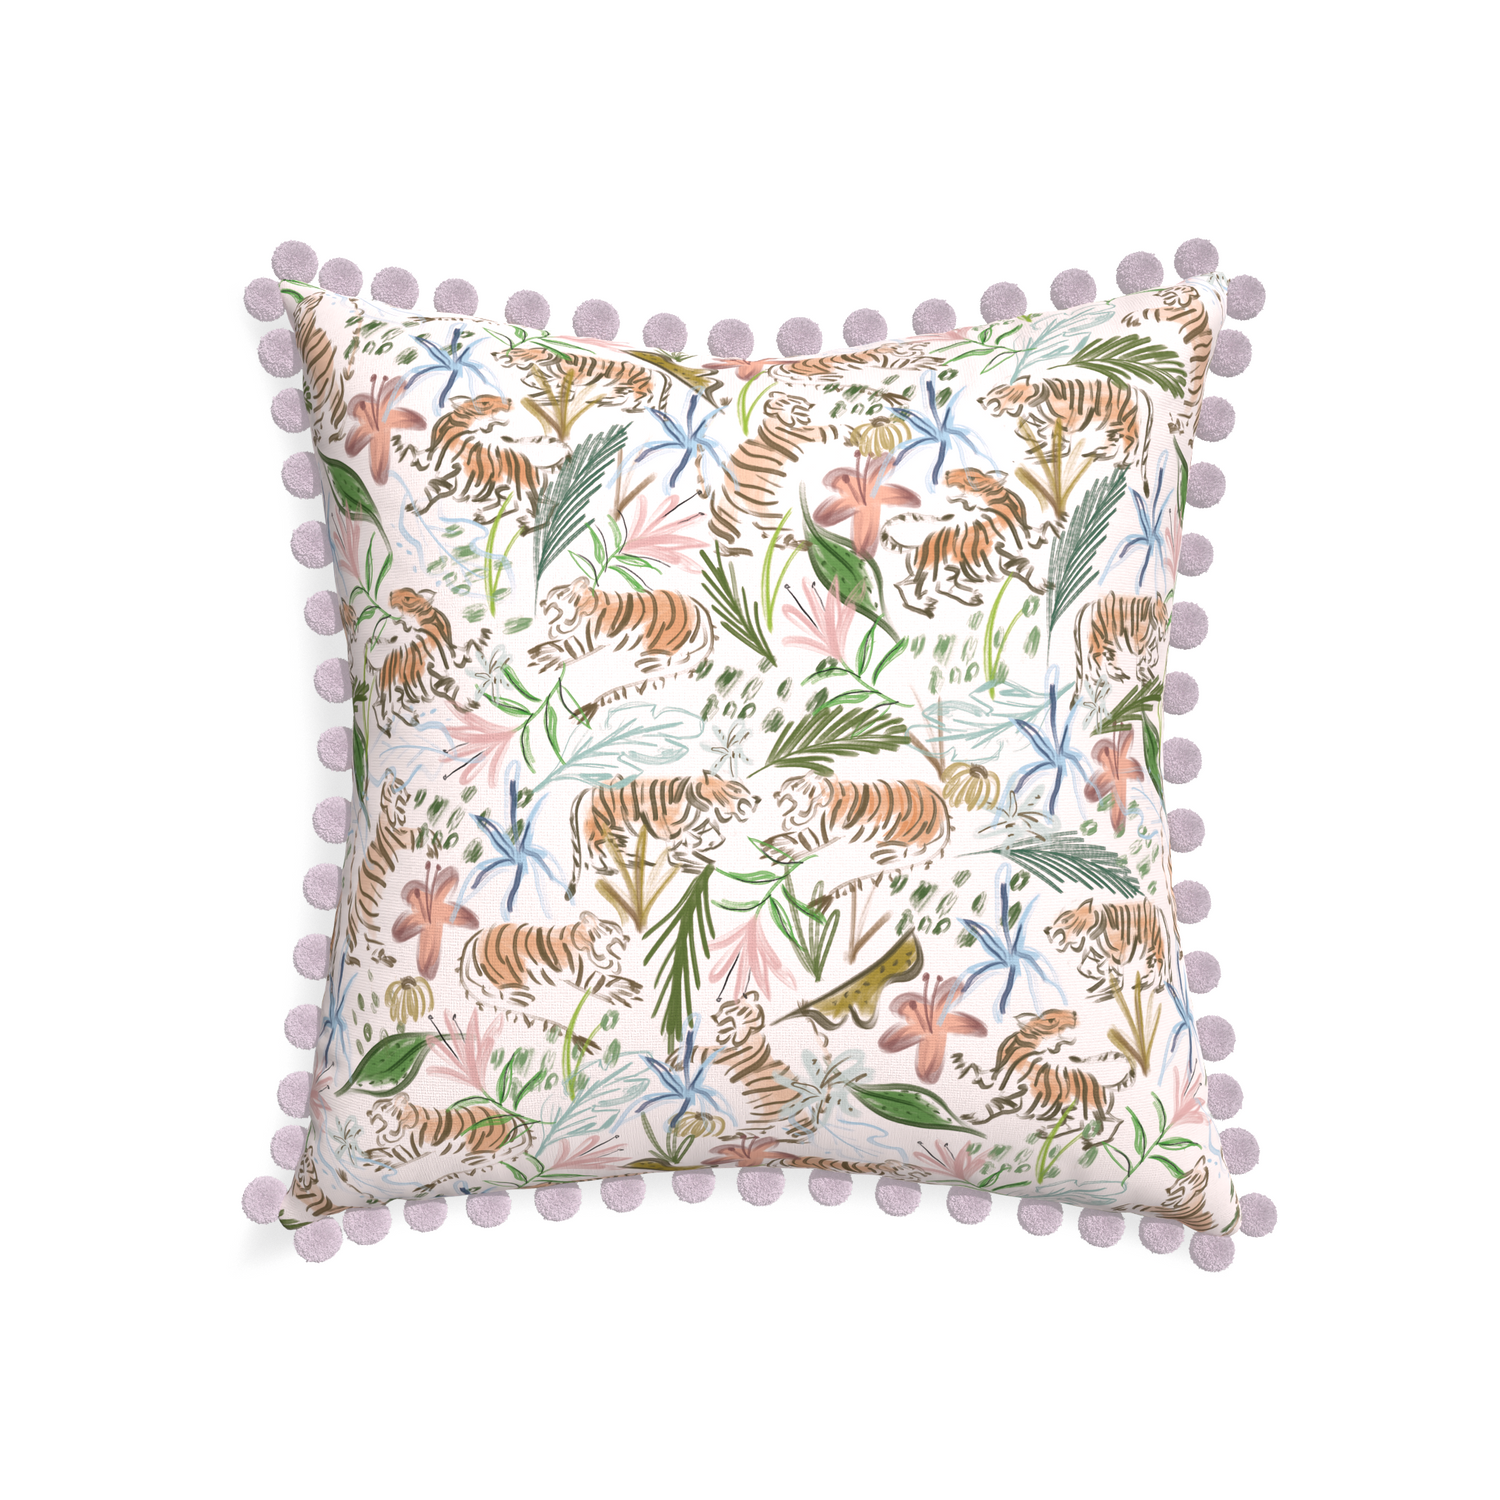 22-square frida pink custom pink chinoiserie tigerpillow with l on white background